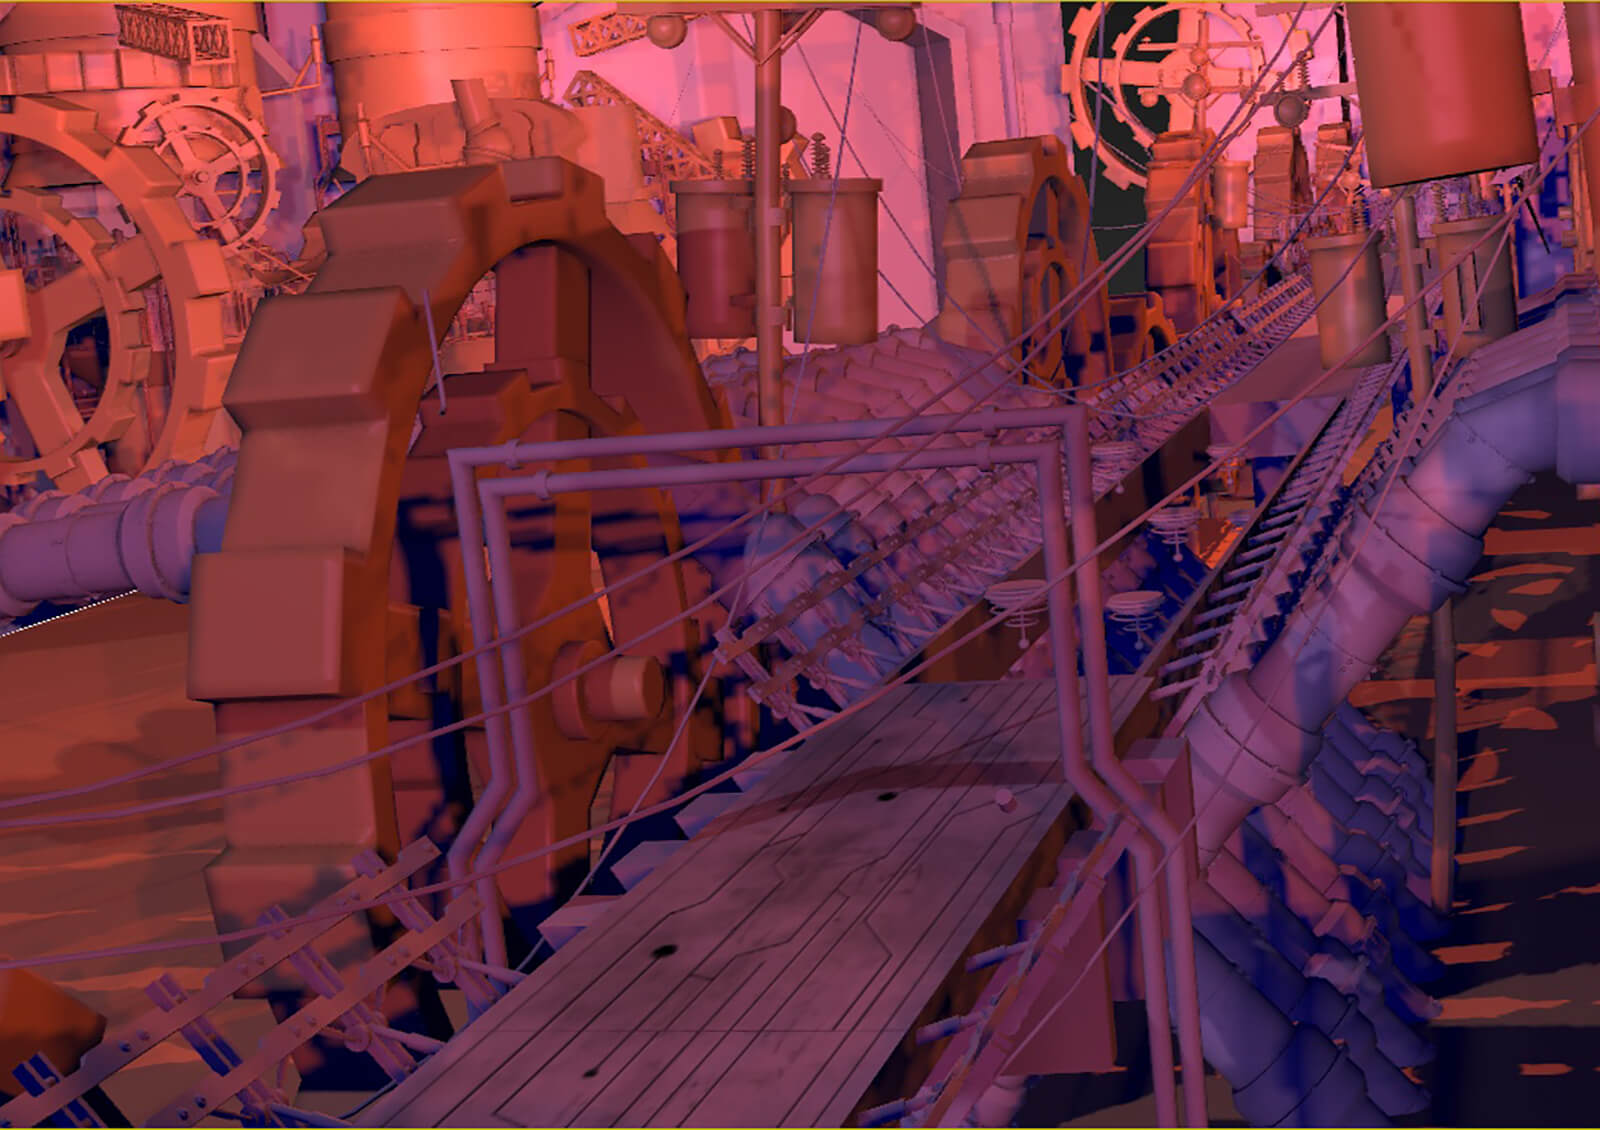 3D model of an industrial corridor including cogs, pipes, and poles from the film Deadly Delivery